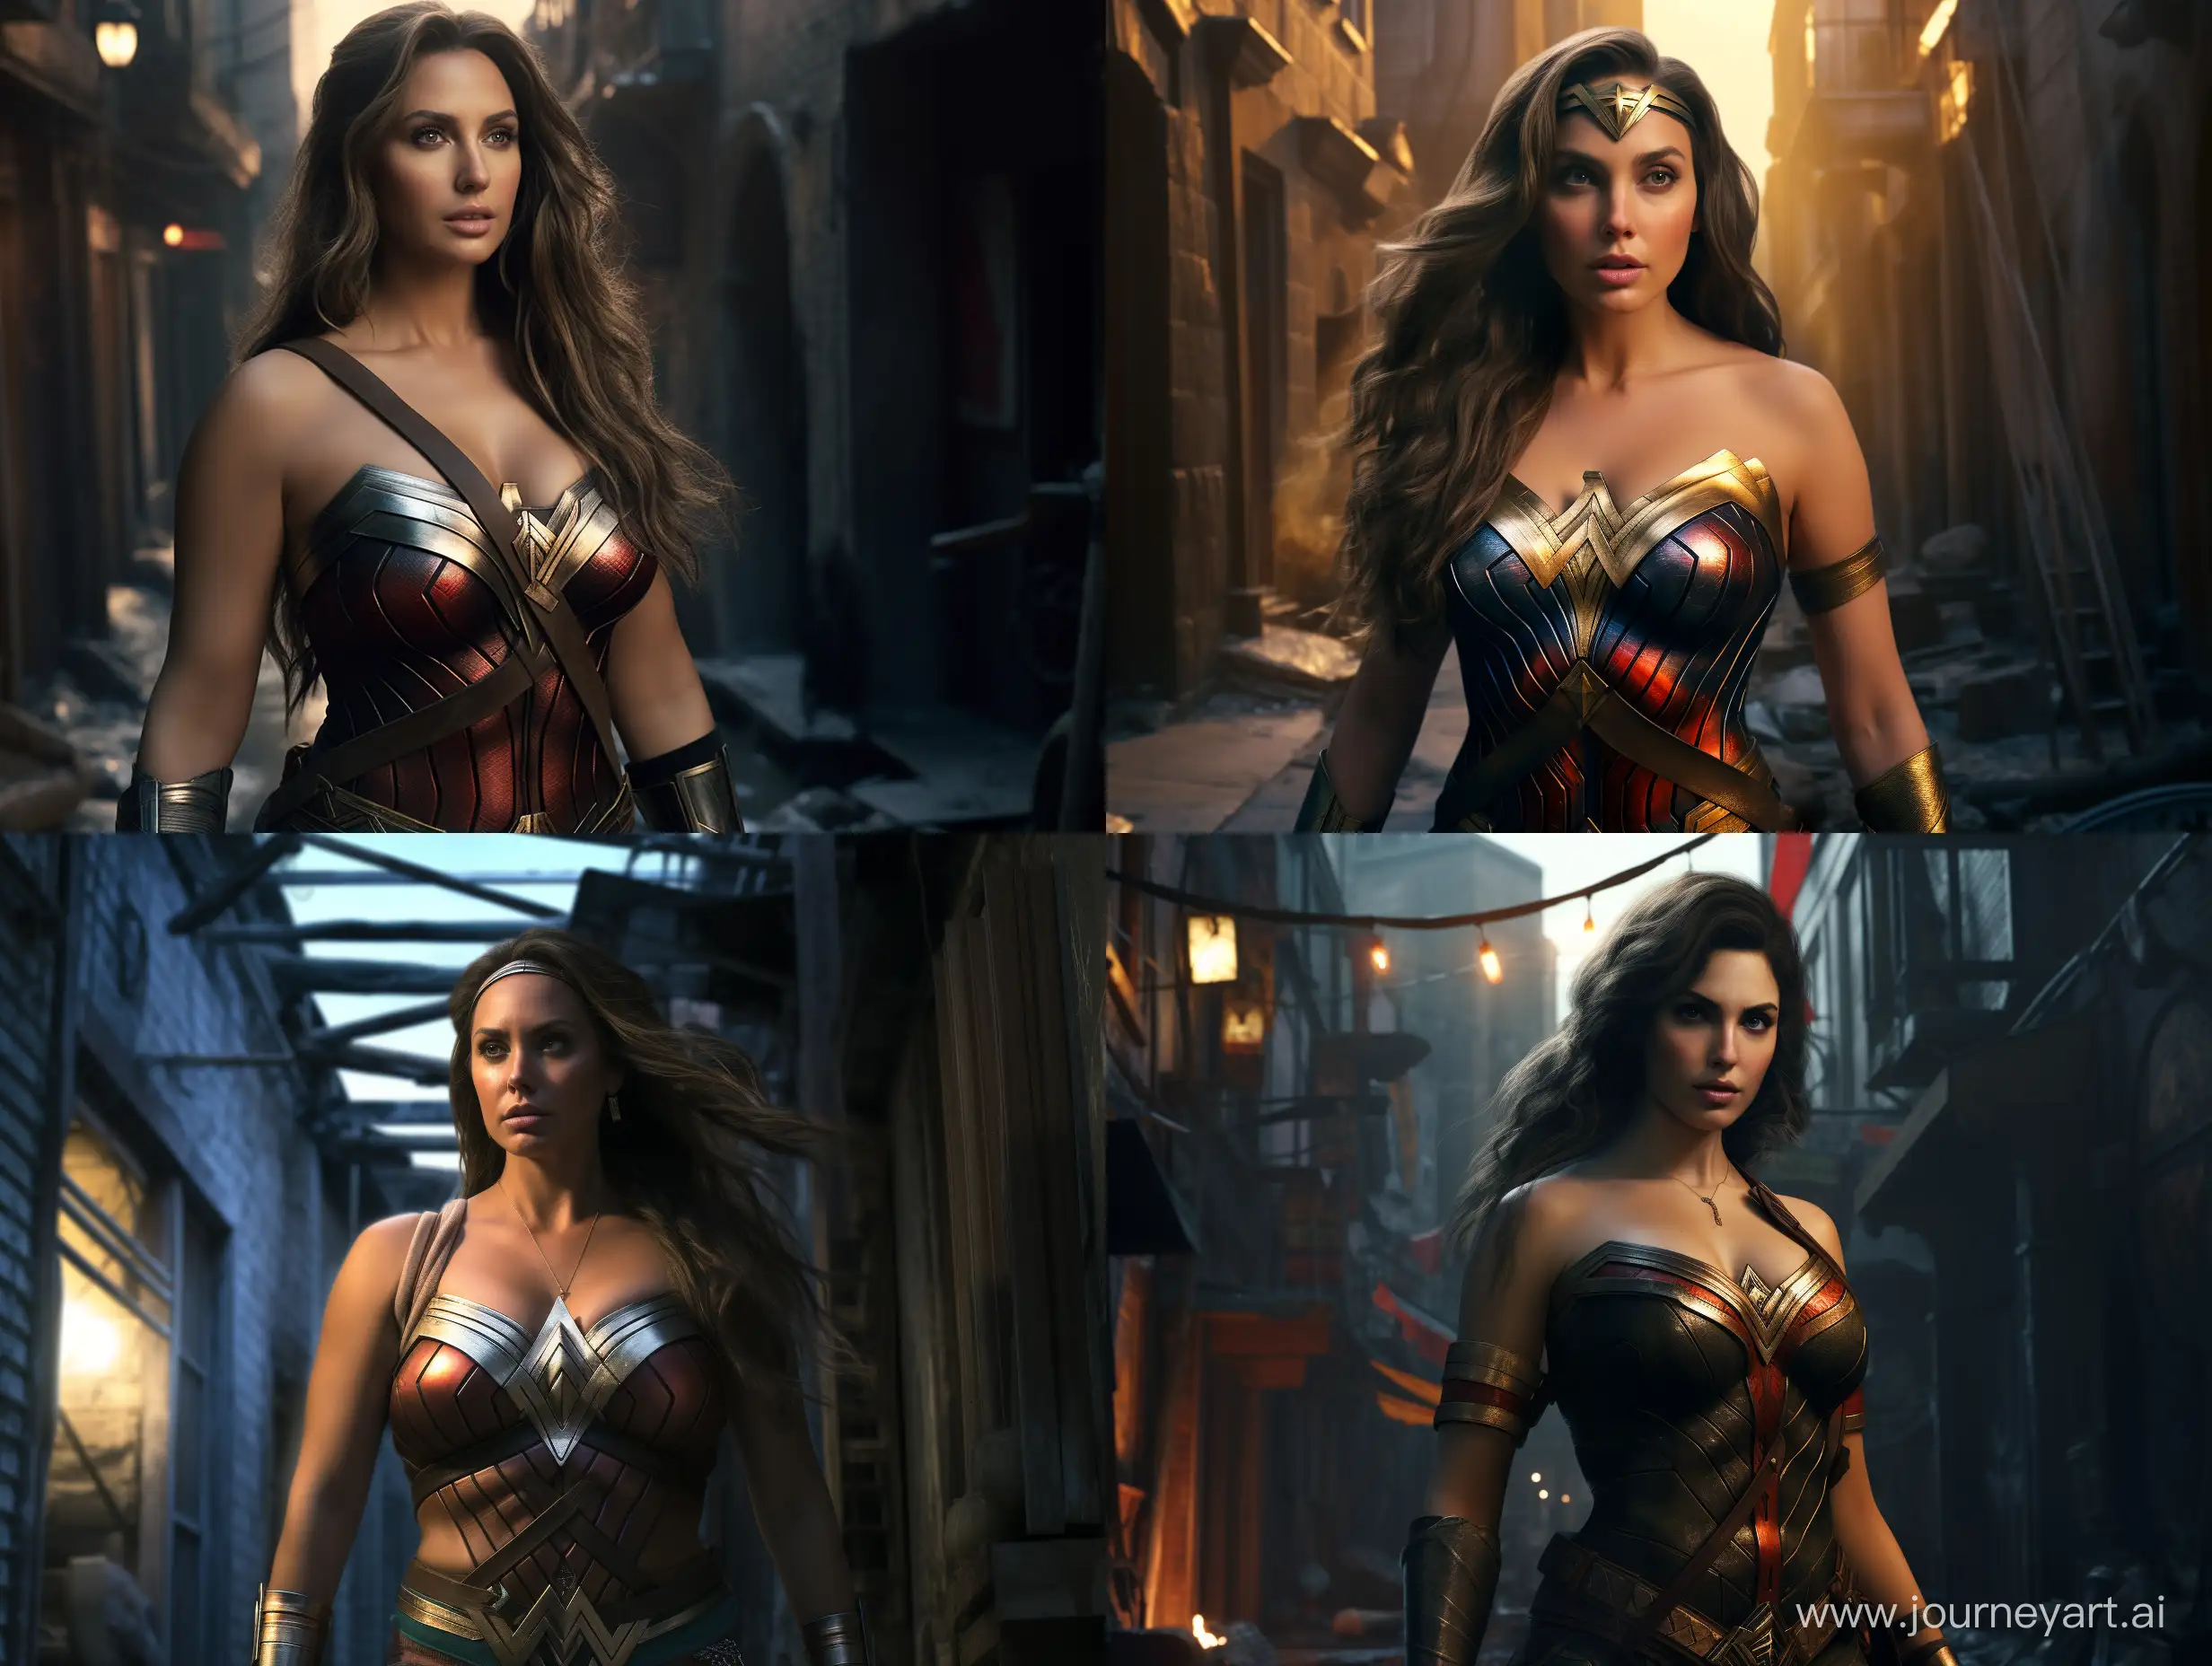 Empowering-Wonder-Woman-Portrait-Confident-and-Realistic-Image-in-Cinematic-Alley-Setting